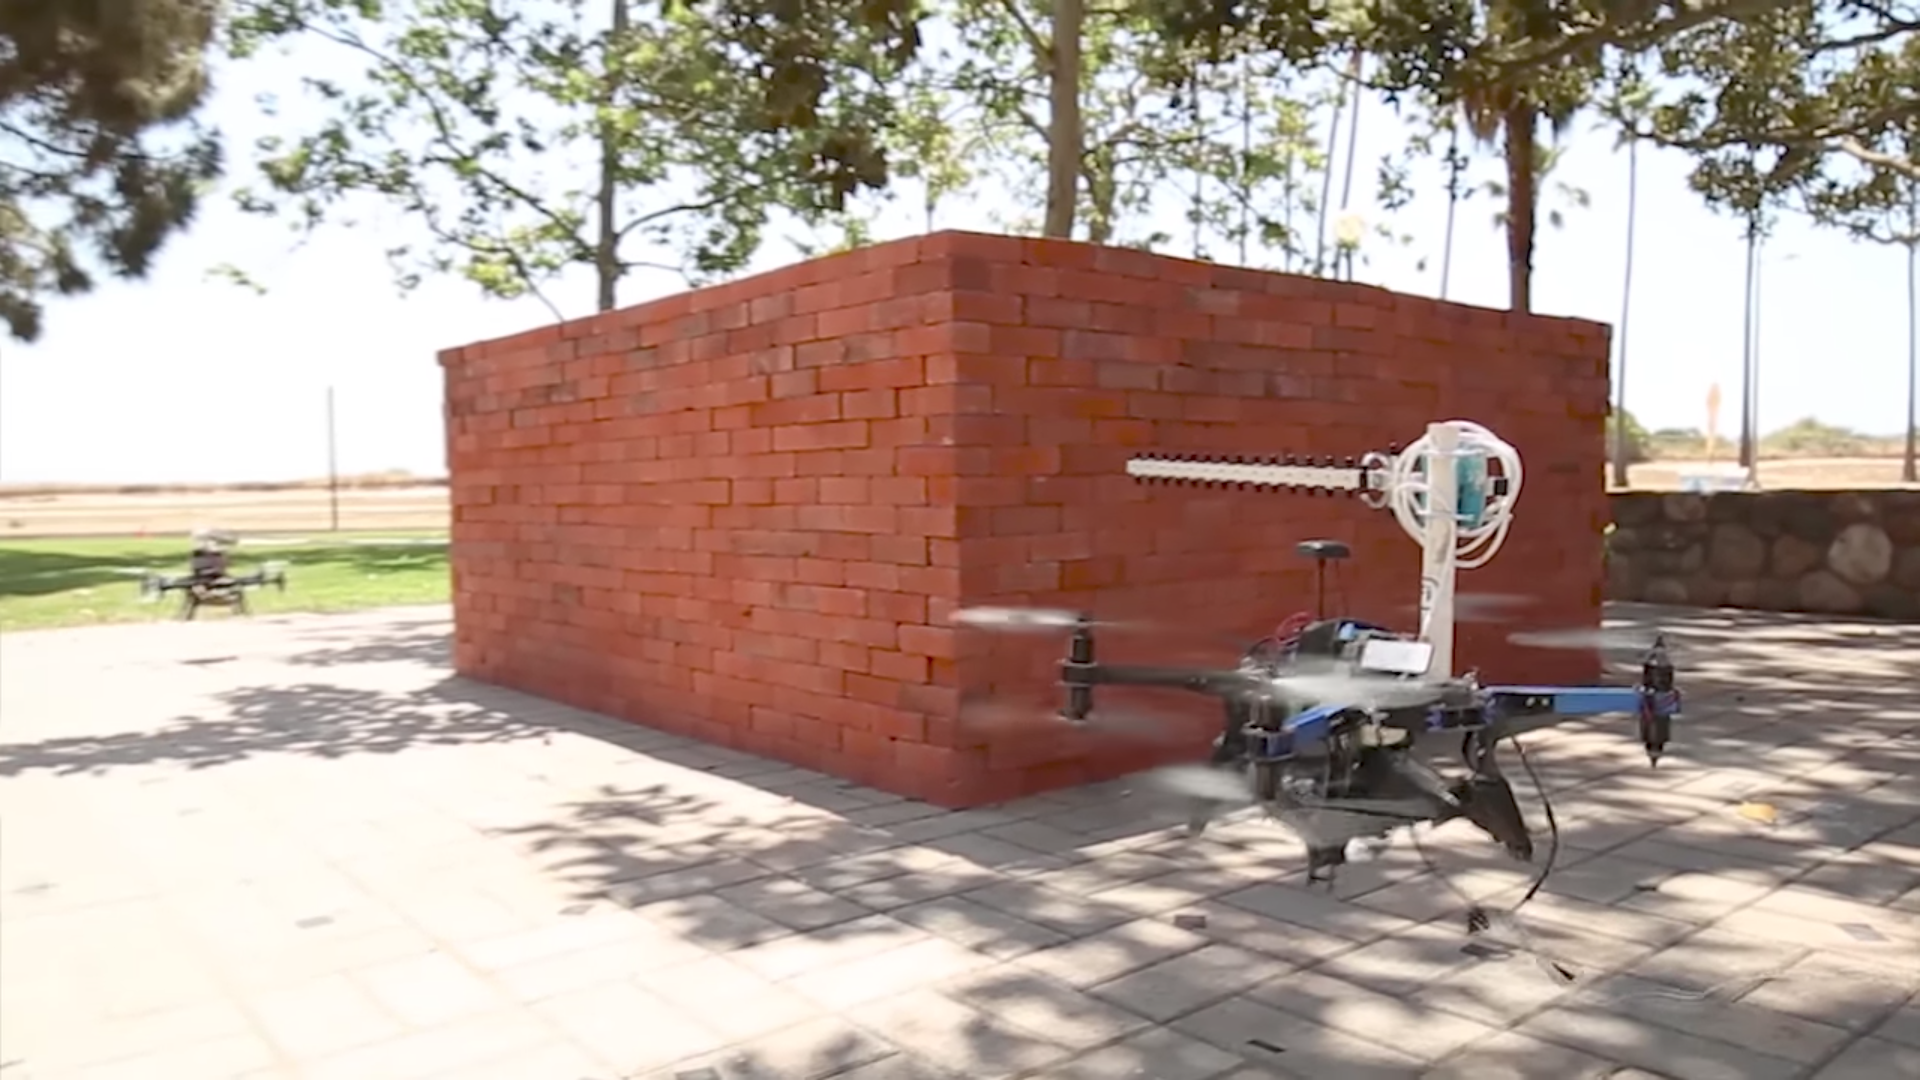 This Drone Uses Wi-Fi for 3-D Through-Wall Imaging